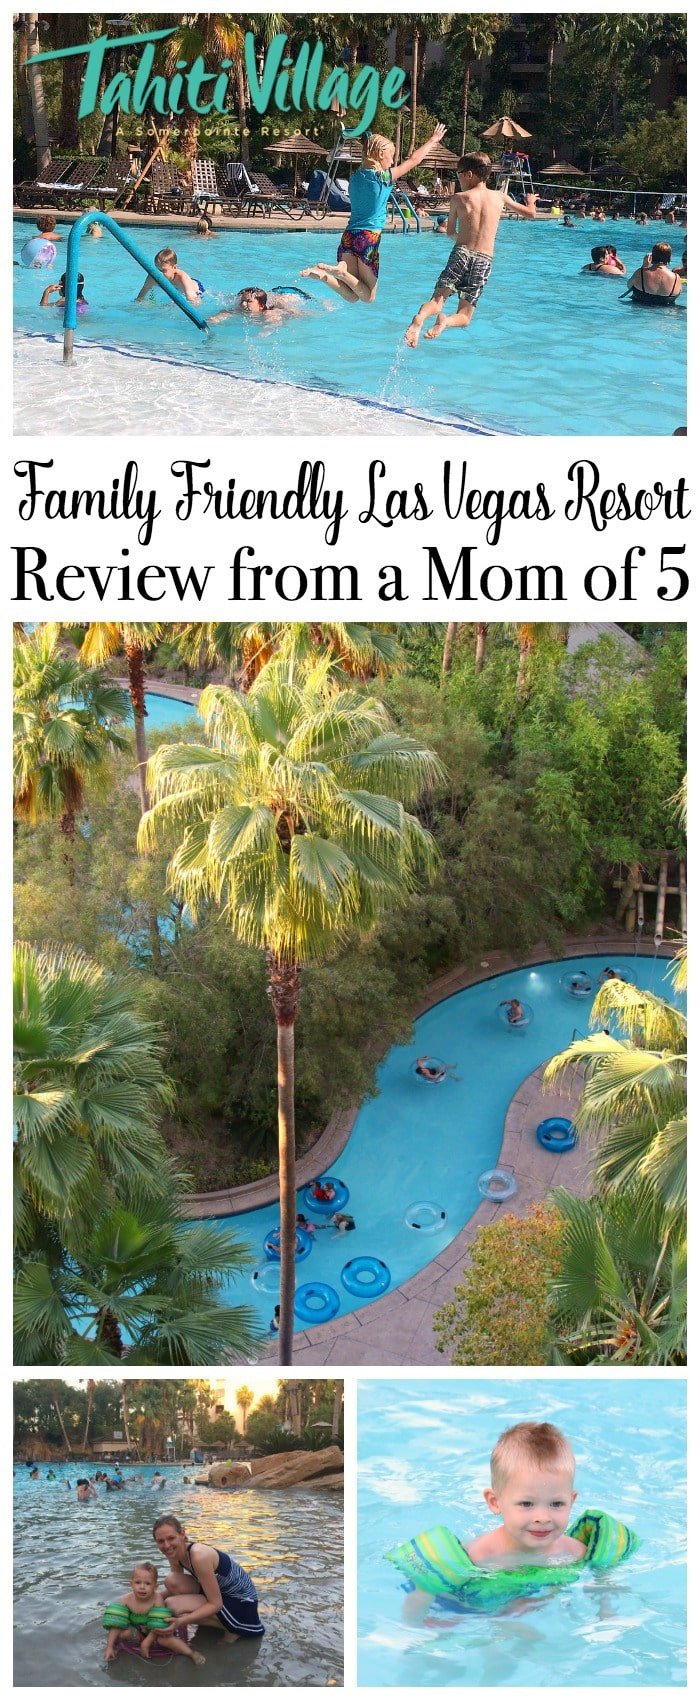 Tahiti Village Resort Review from a mom of 5. See what we loved and what we wished was different about our family friendly Las Vegas vacation at Tahiti Village resort. Tips and suggestions on making the most of your Tahiti Village vacation. 